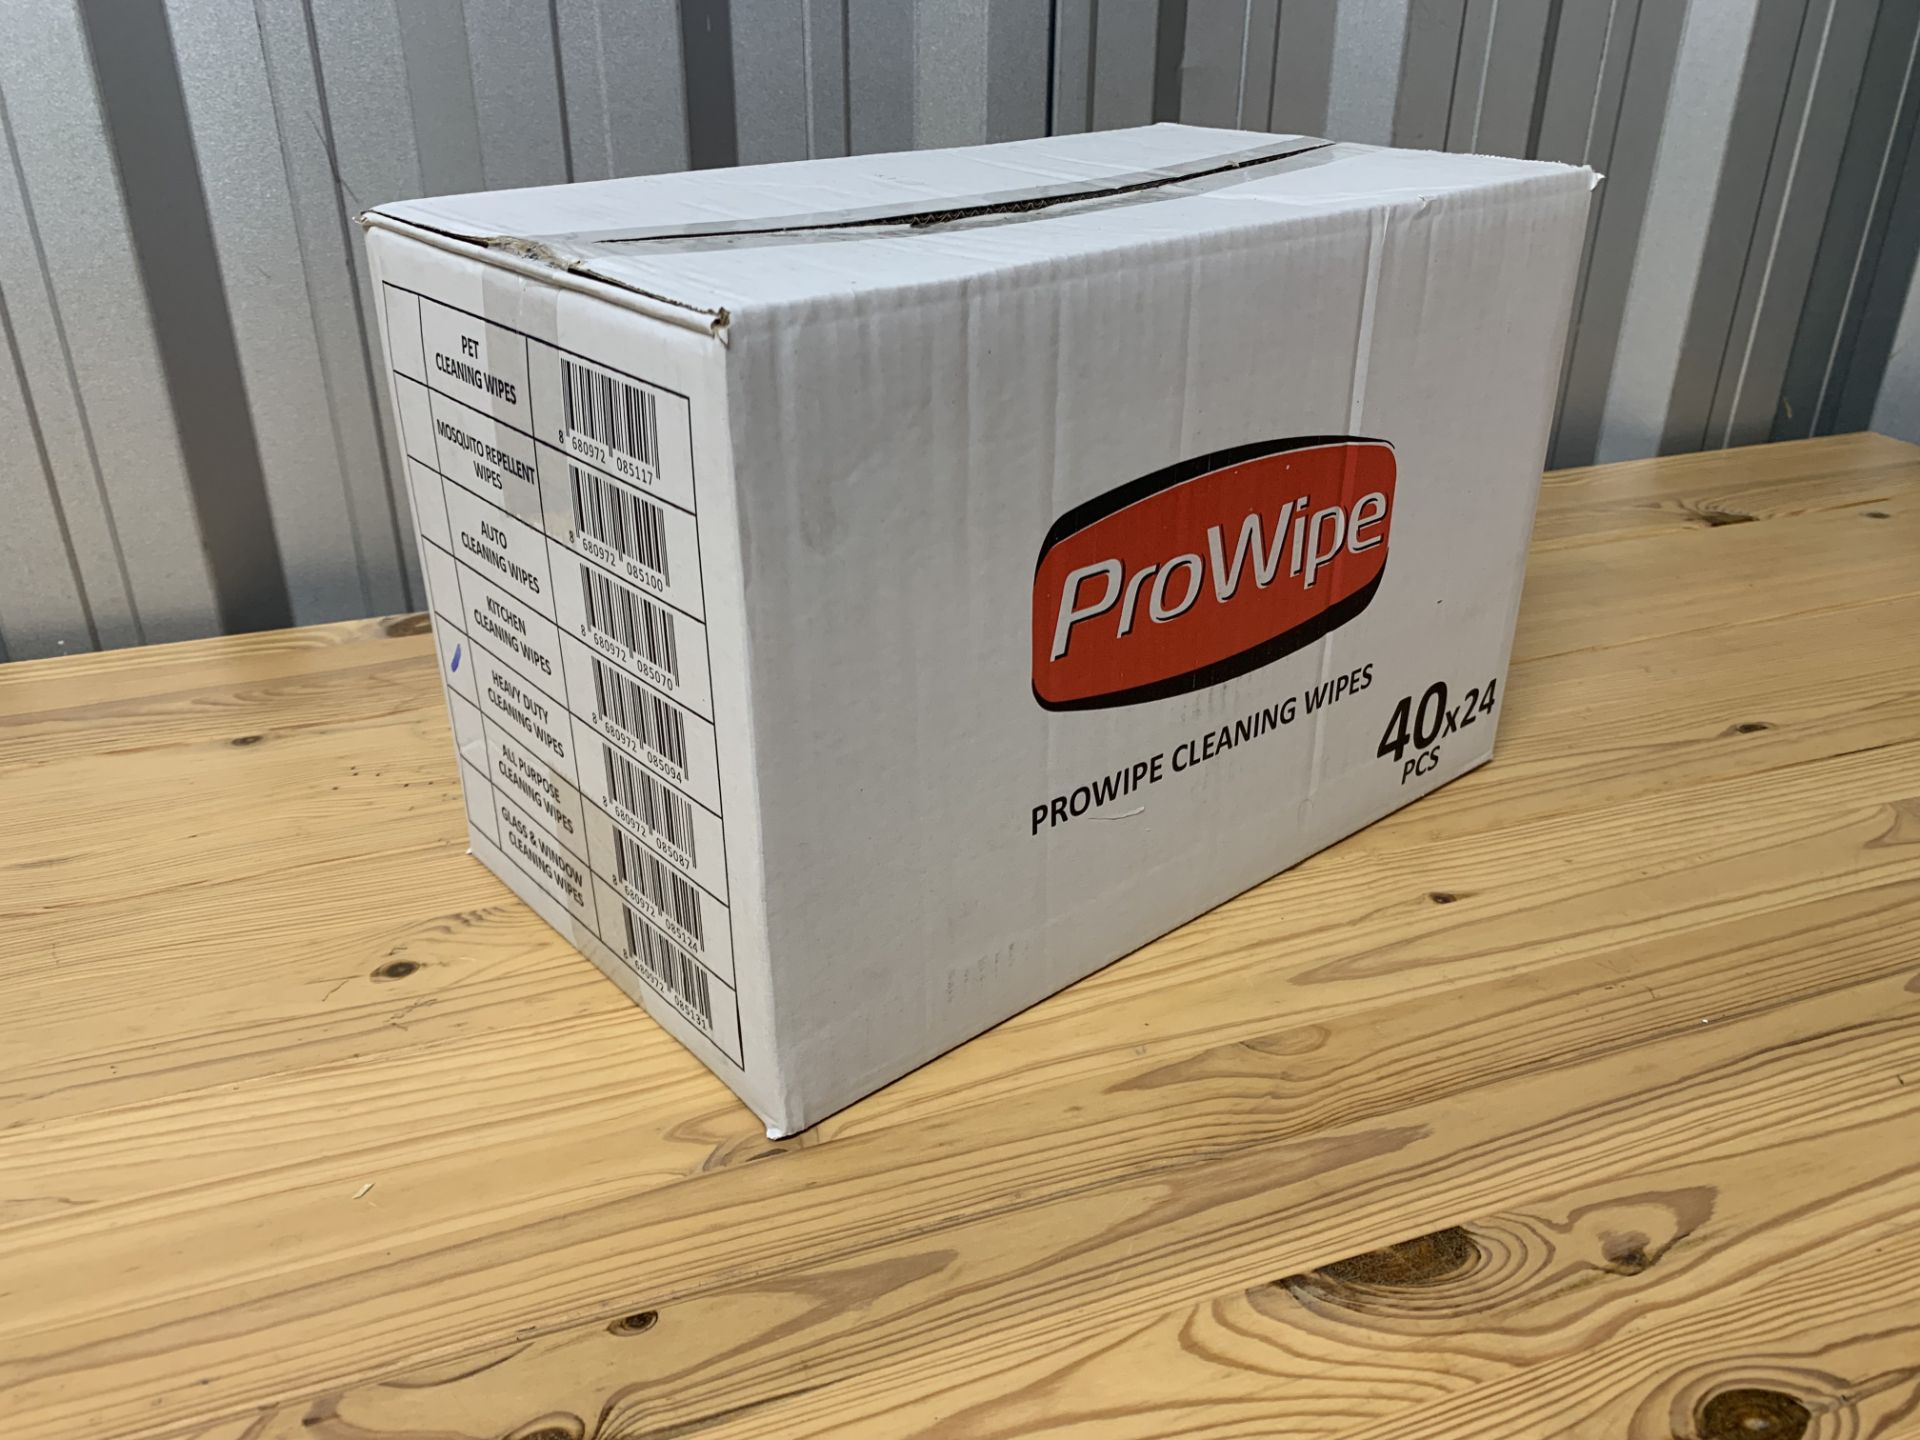 24x ProWipe Heavy Duty Cleaning Wipes - Image 9 of 10